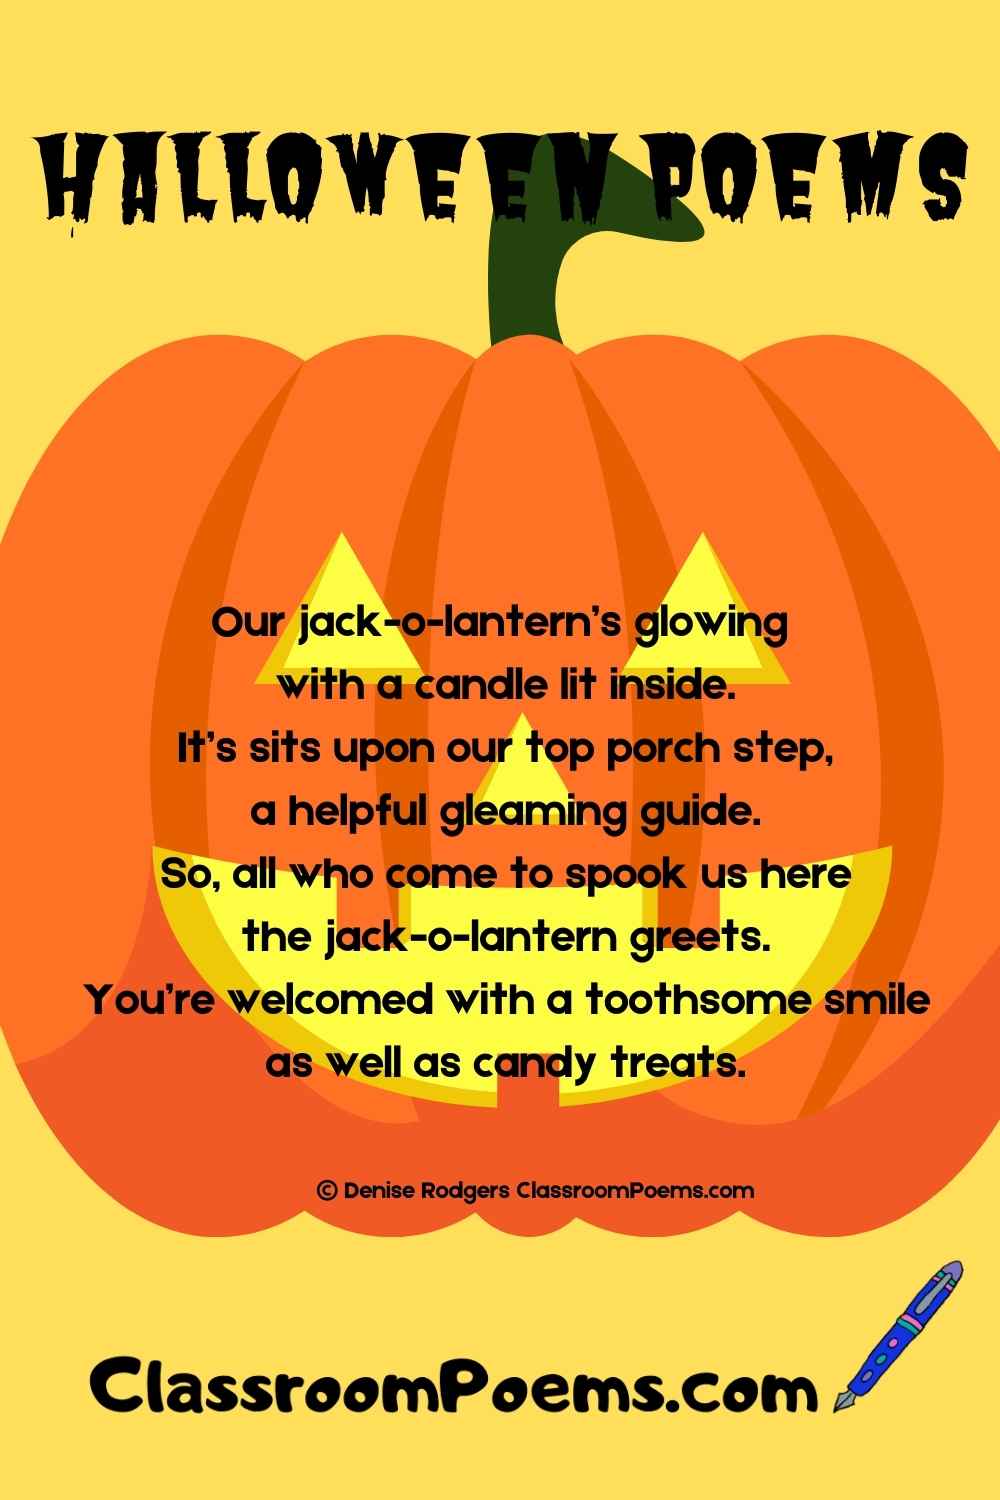 Enjoy these Halloween poems about ghosts, witches, Frankenstein, Dracula, Jack-o-lanterns and, most of all, about candy!